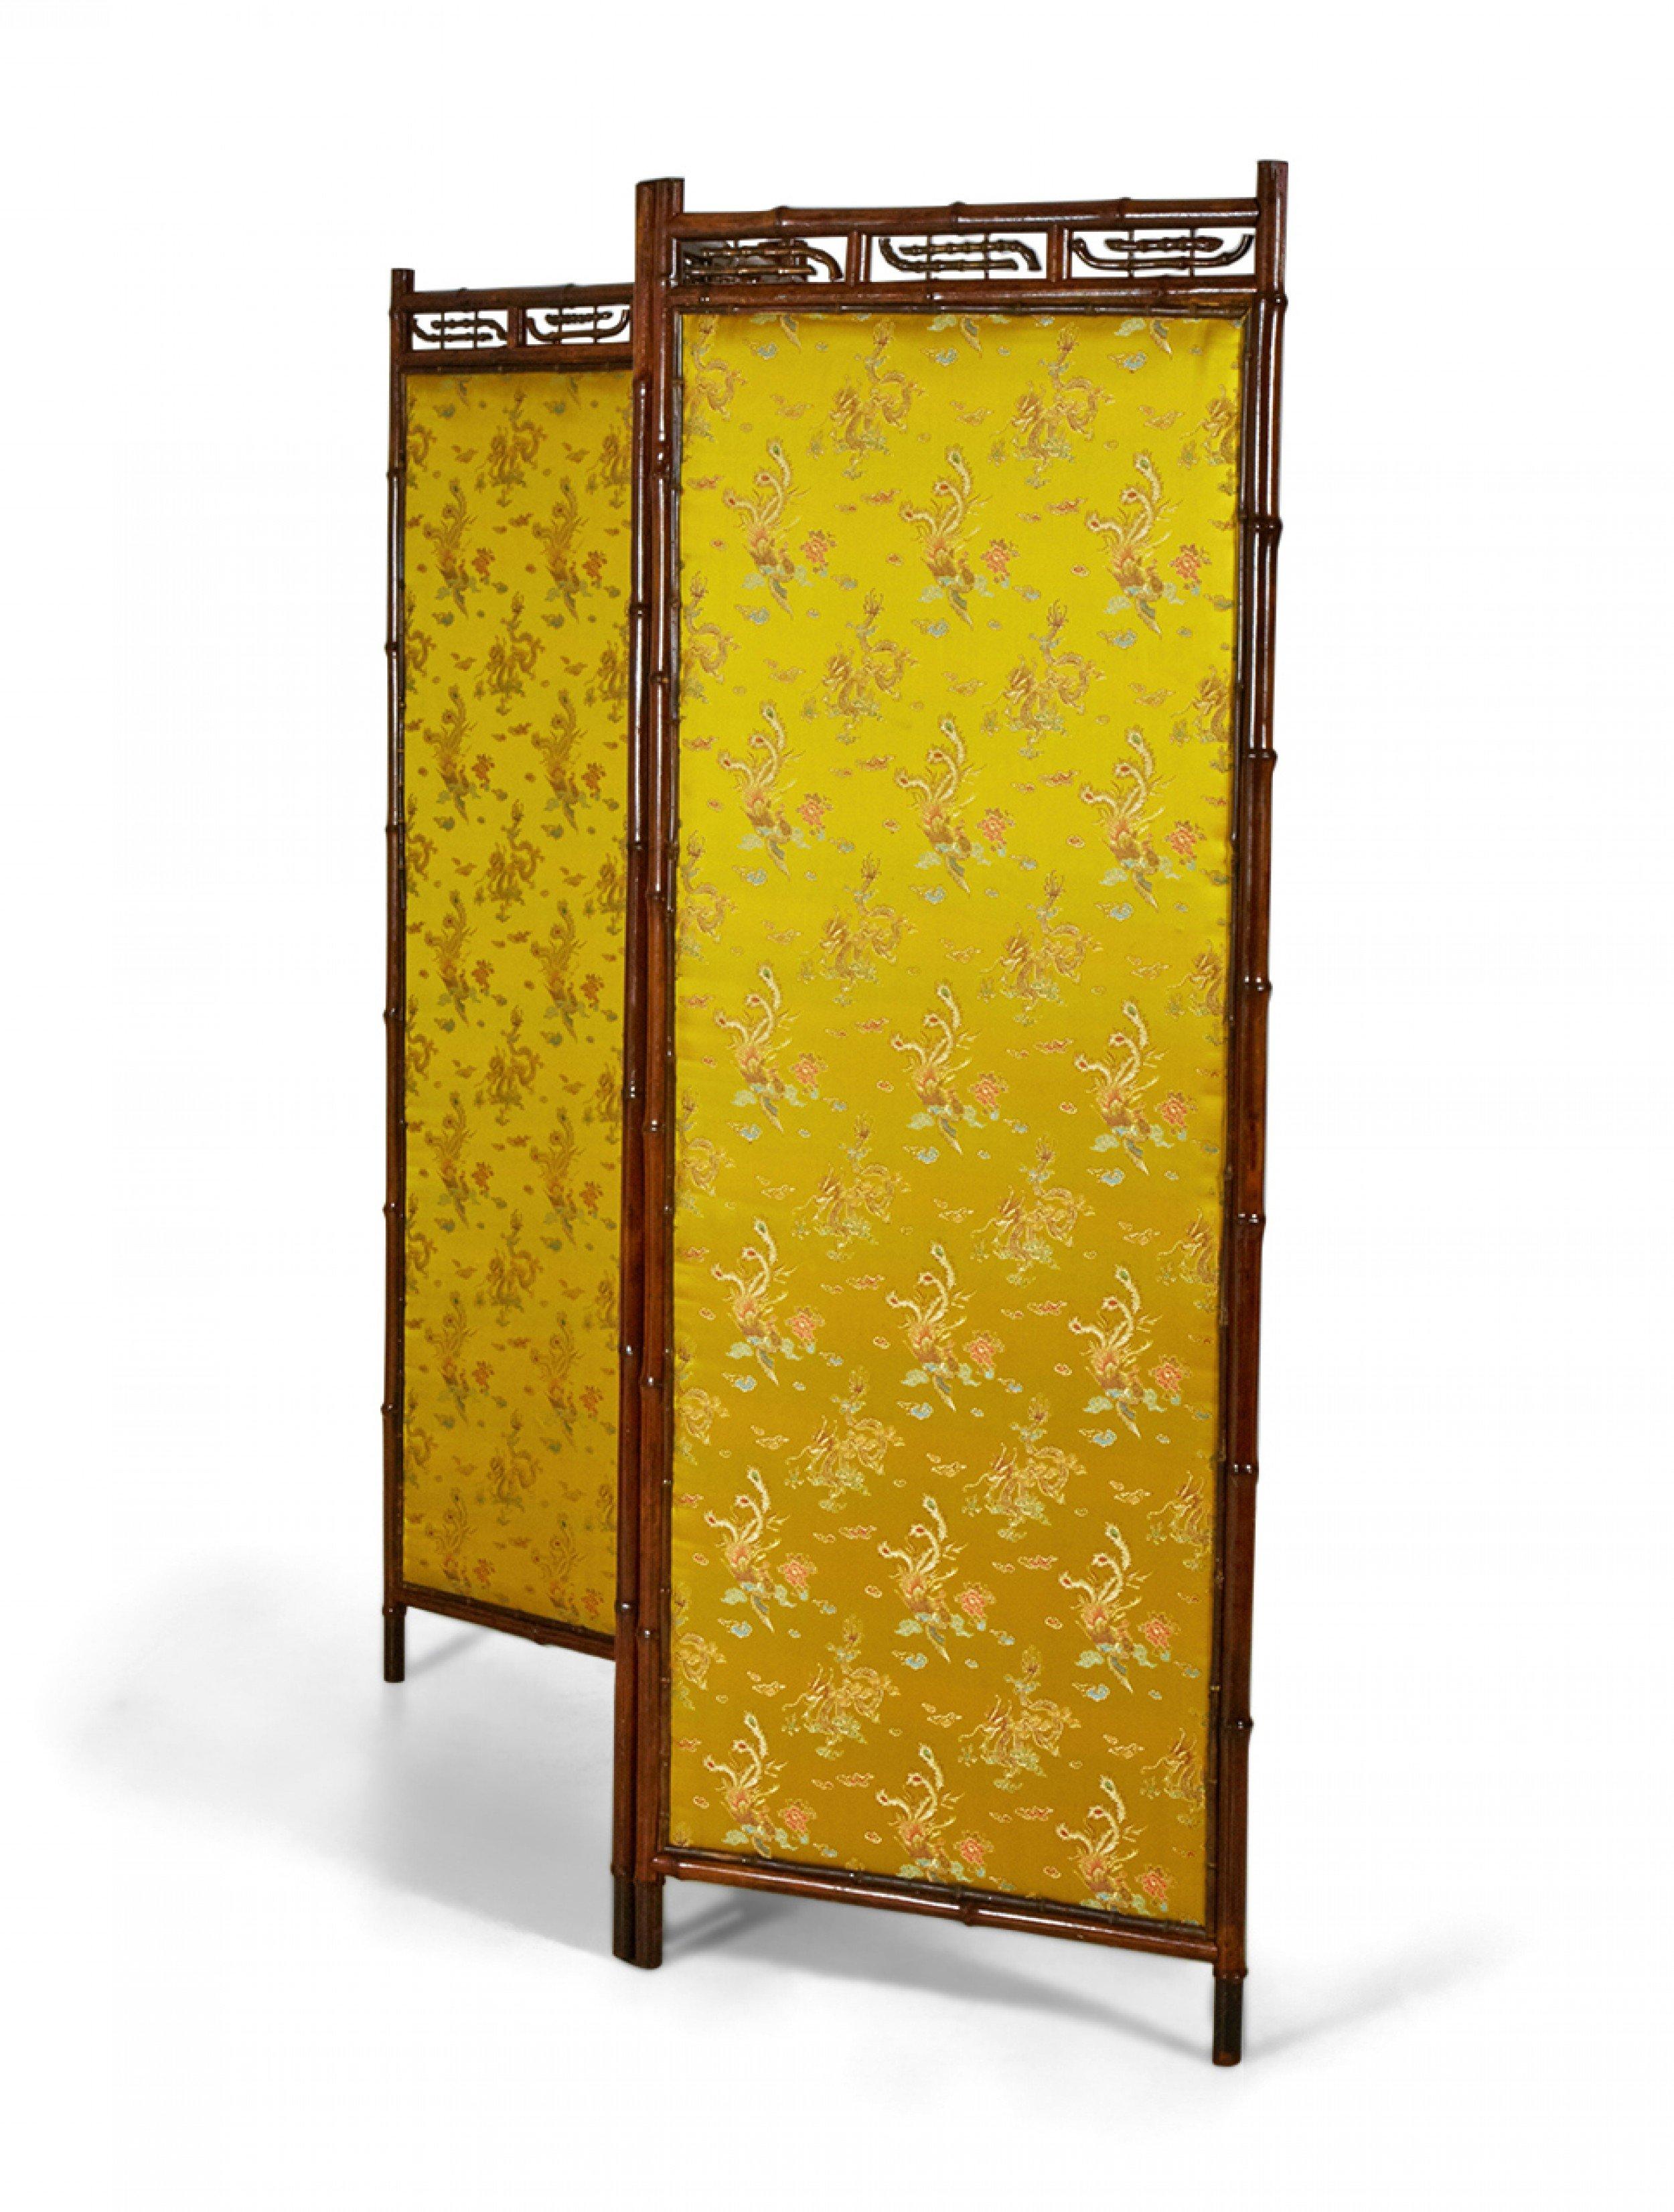 British Victorian Bamboo 3-Fold Screen with Floral Green and Yellow Upholstered Panels For Sale